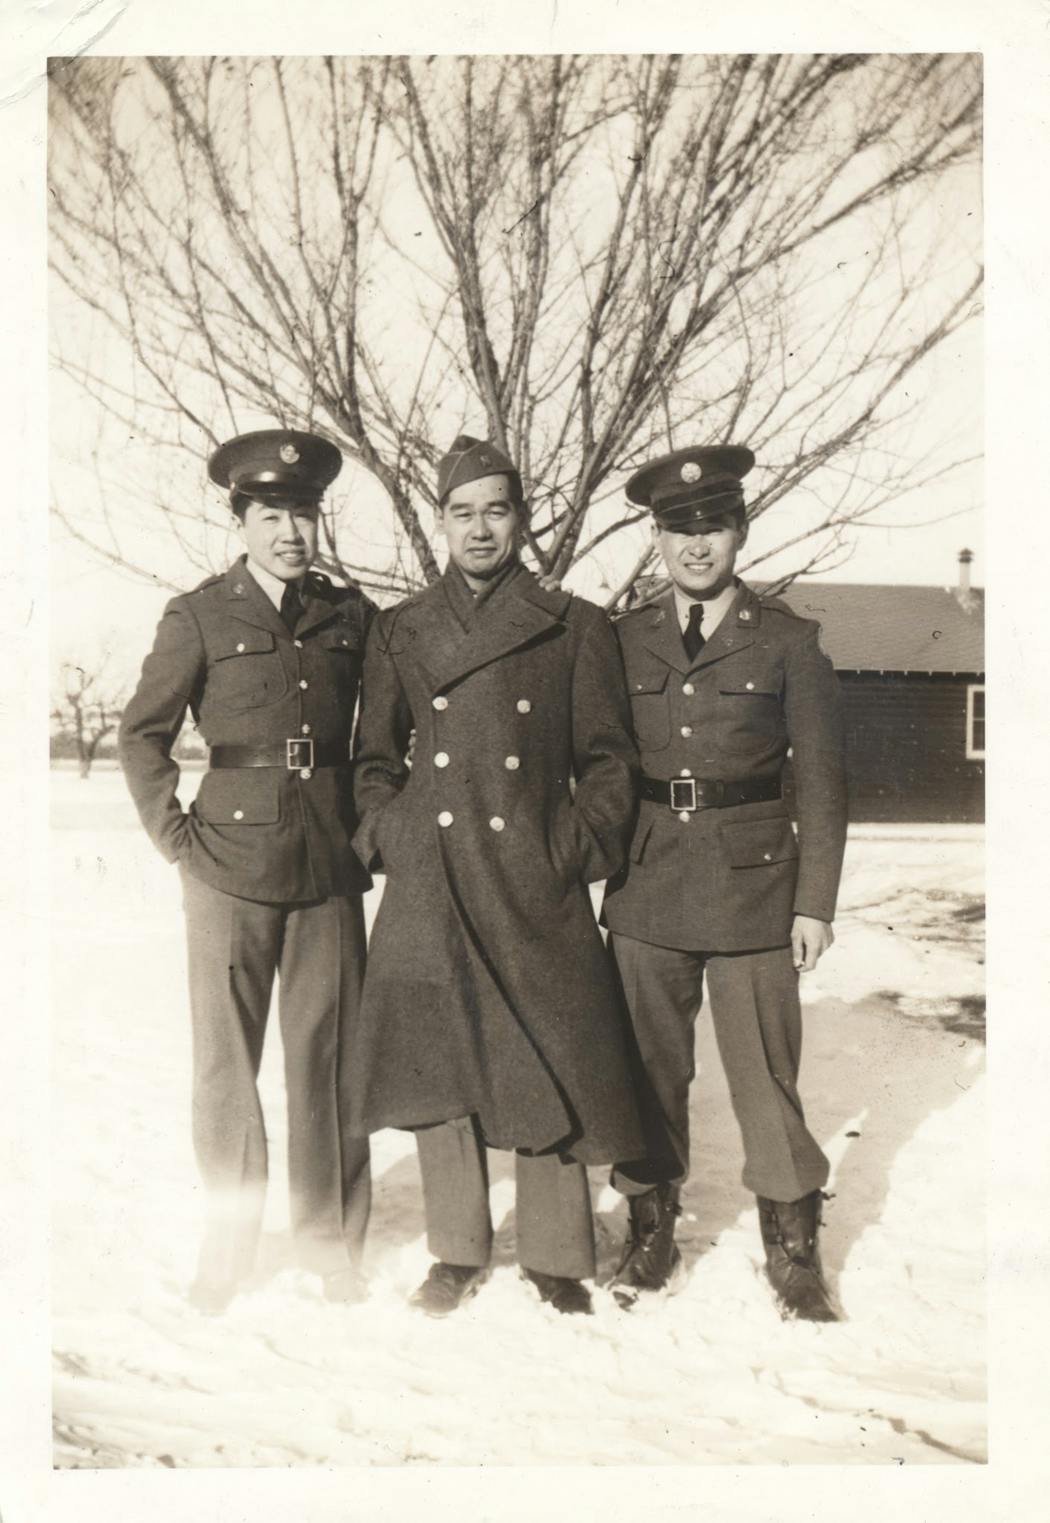 Walter Tanaka, right, posed for a photo with Ted Kihara and Hitoshi Okimura while attending the military language school at Camp Savage. Tanaka was part of its first graduating class in 1942.